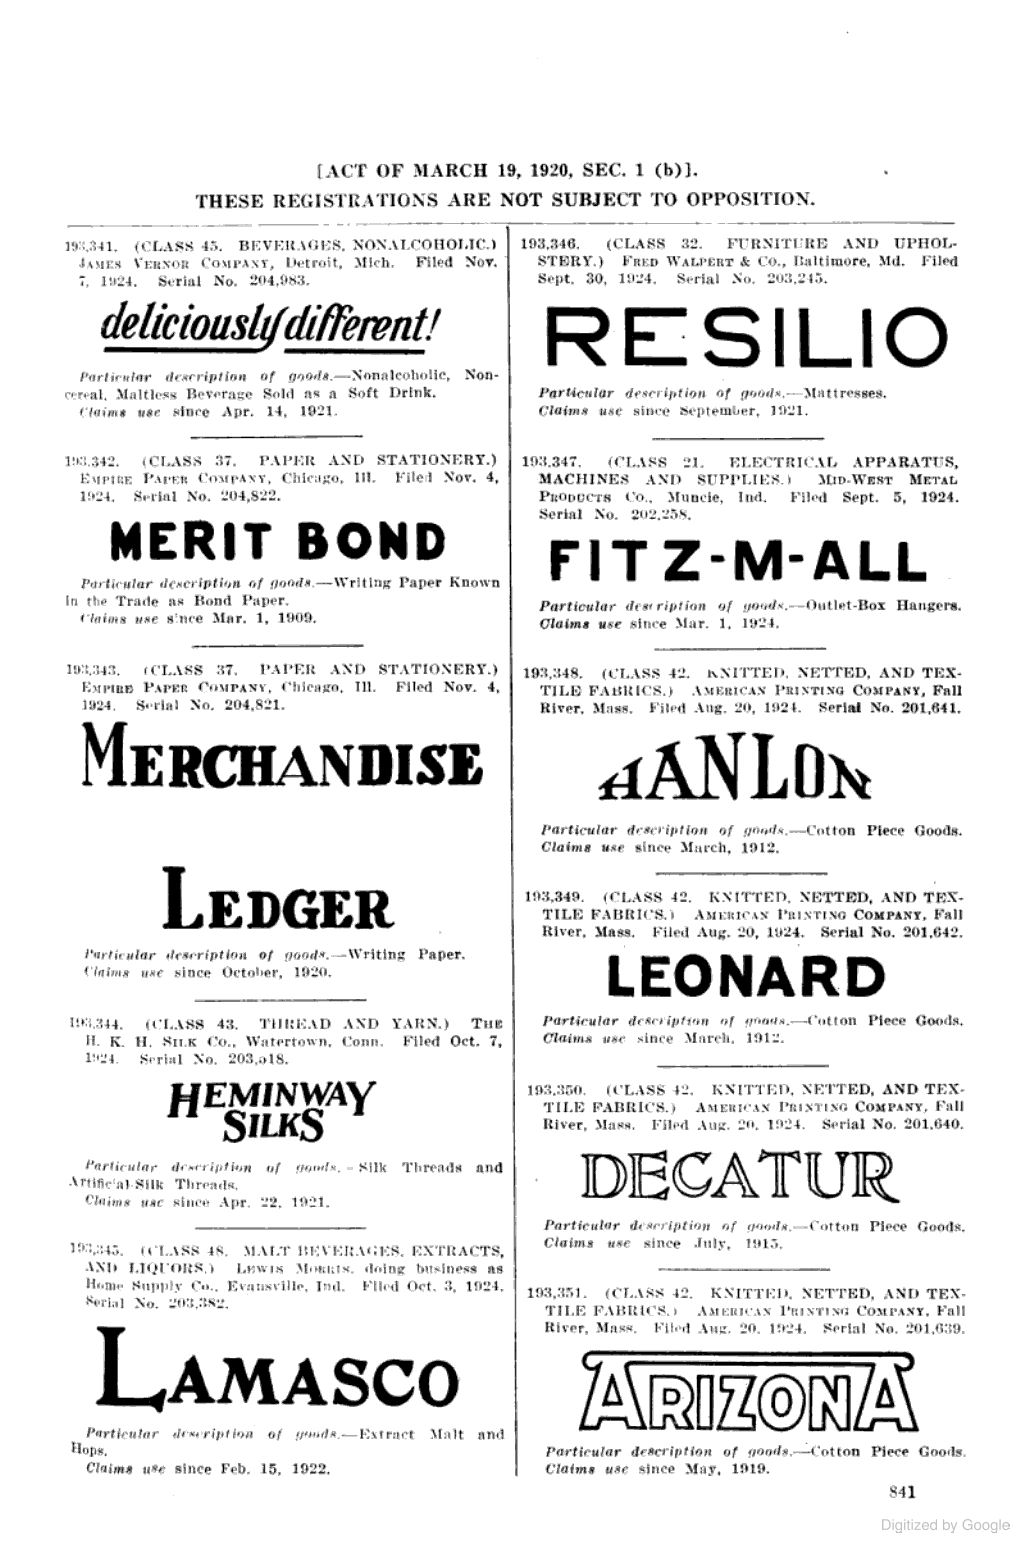 Vernor Deliciously Different 1921 1924.png